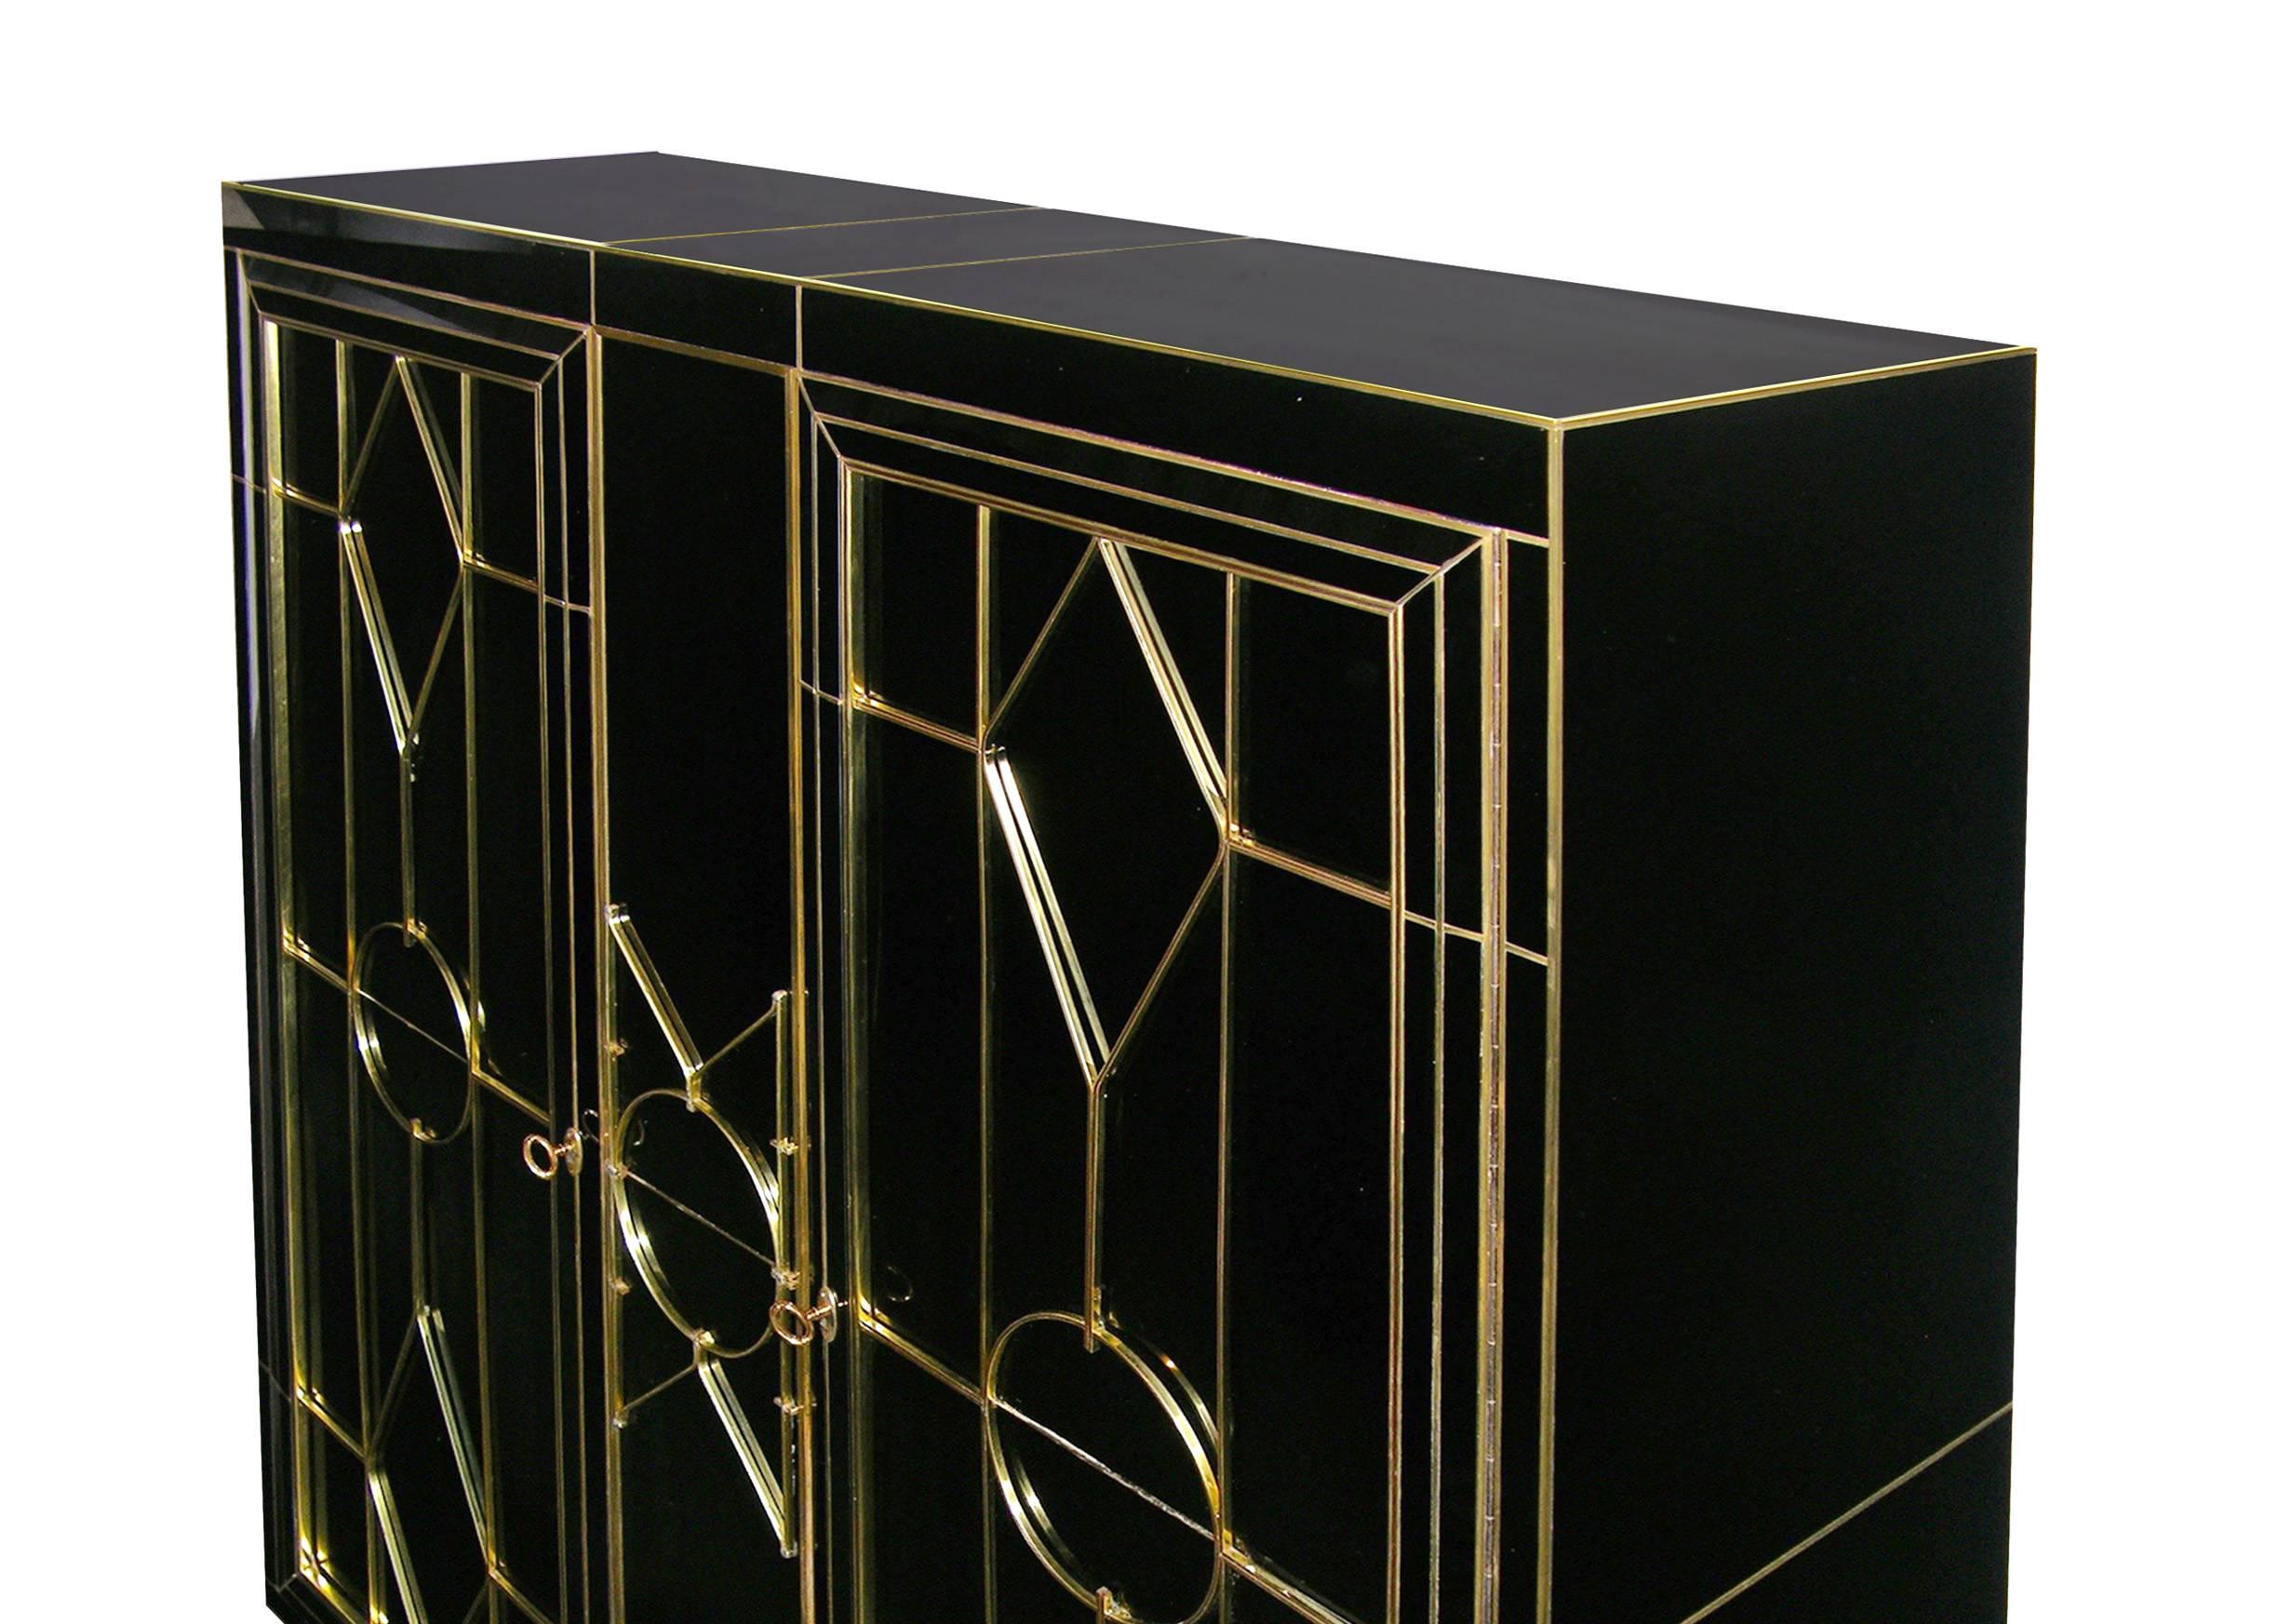 This late 1970s one-of-a kind Italian cabinet, from the North of Italy, entirely handmade, is covered in black glass highlighted with brass inlays. It is skillfully hand decorated with a bronze raised pattern on the front. The two doors are enclosed